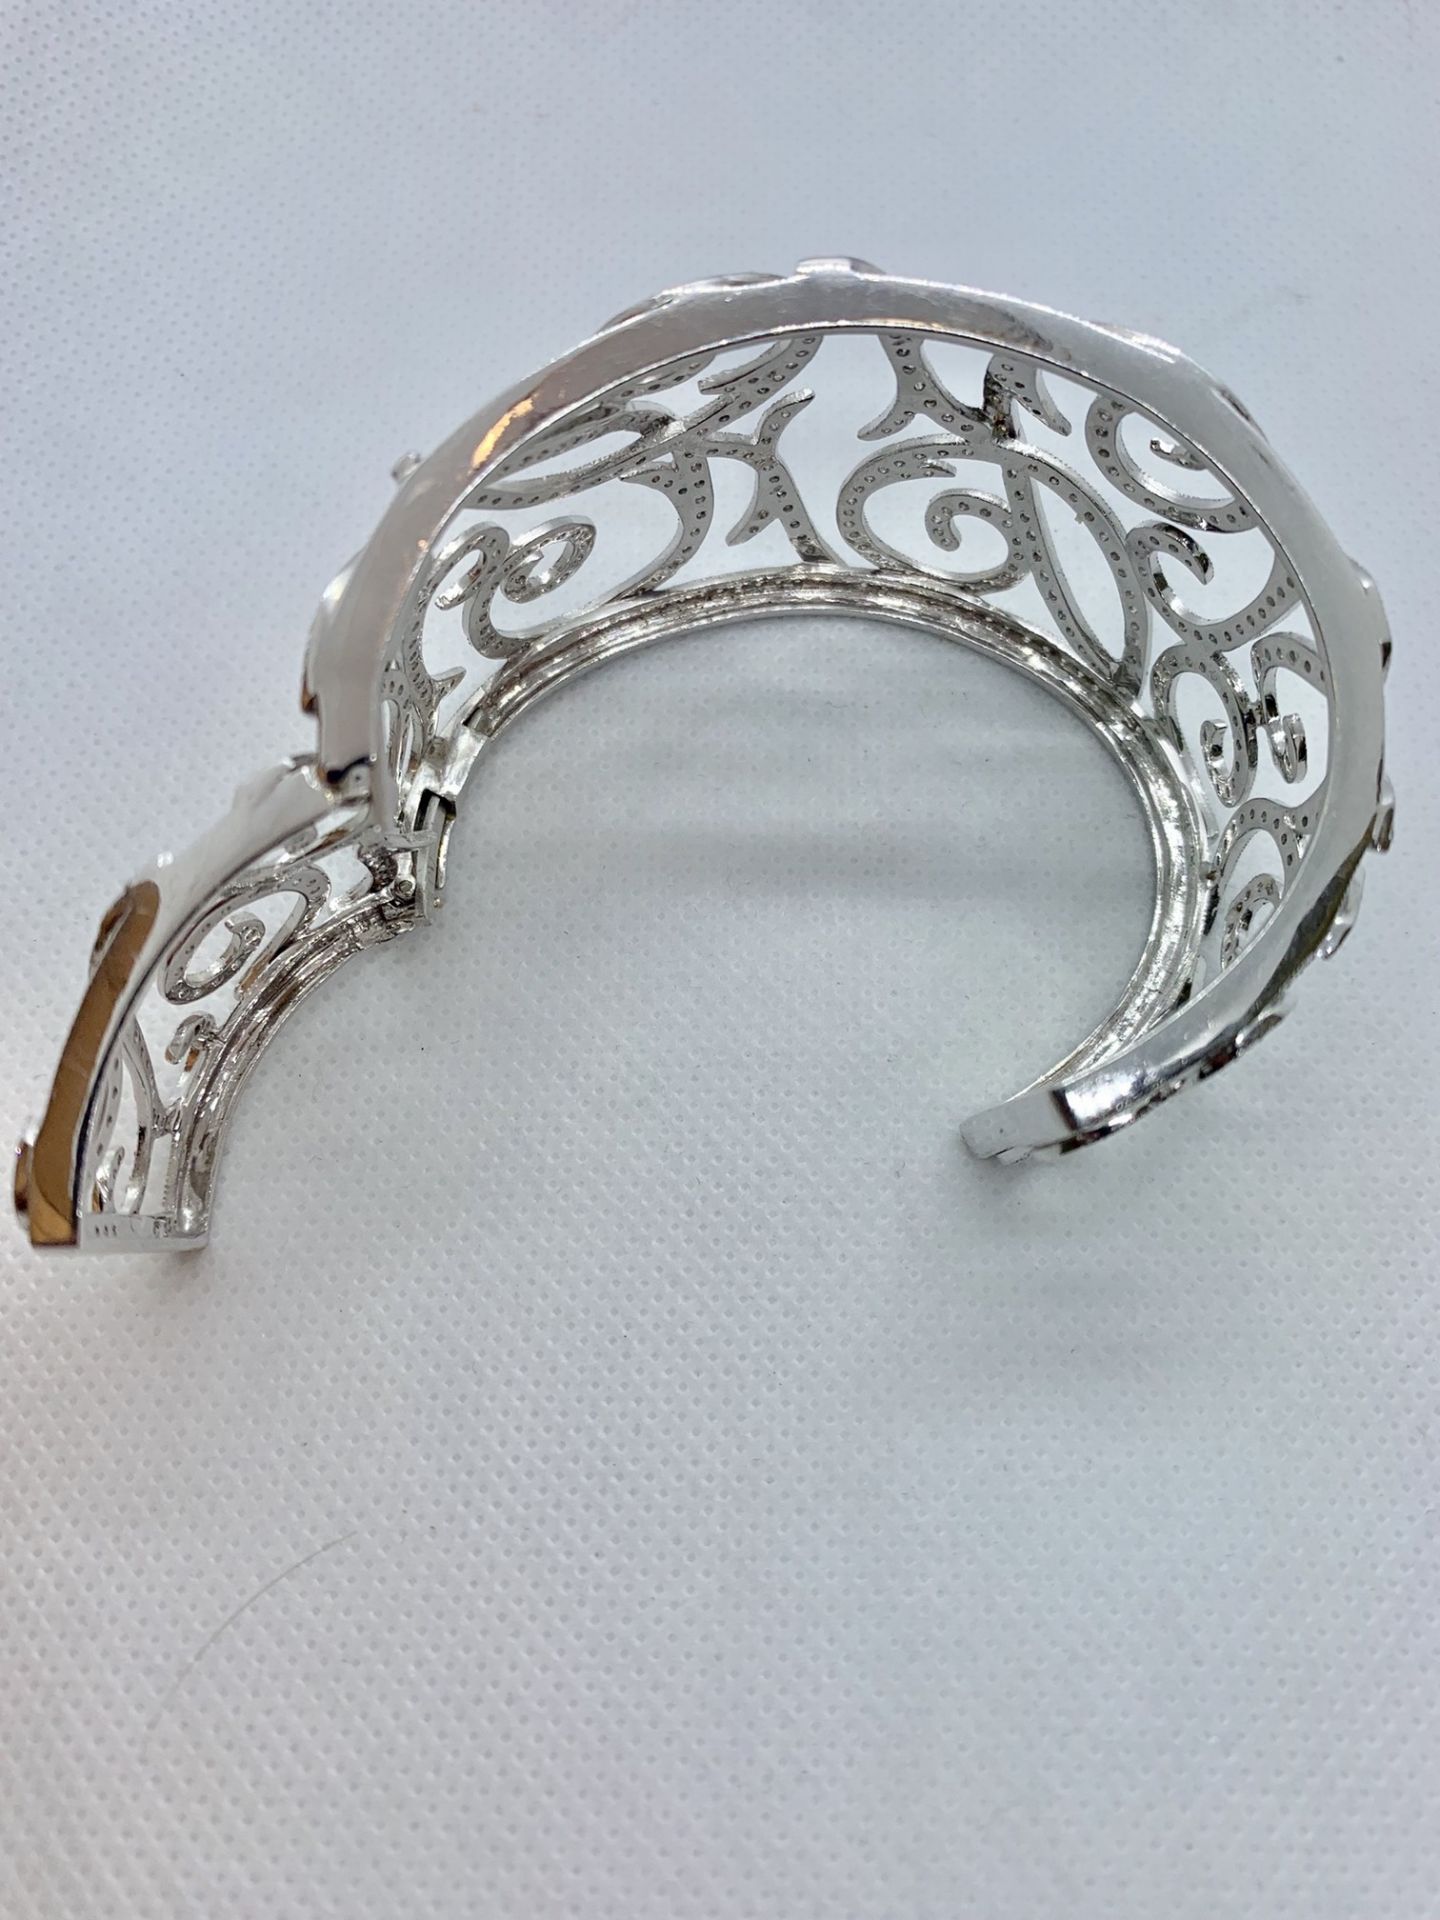 AMAZING 10.00ct APPROX HINGED 18ct WHITE GOLD DIAMOND ENCRUSTED BANGLE - Image 6 of 6